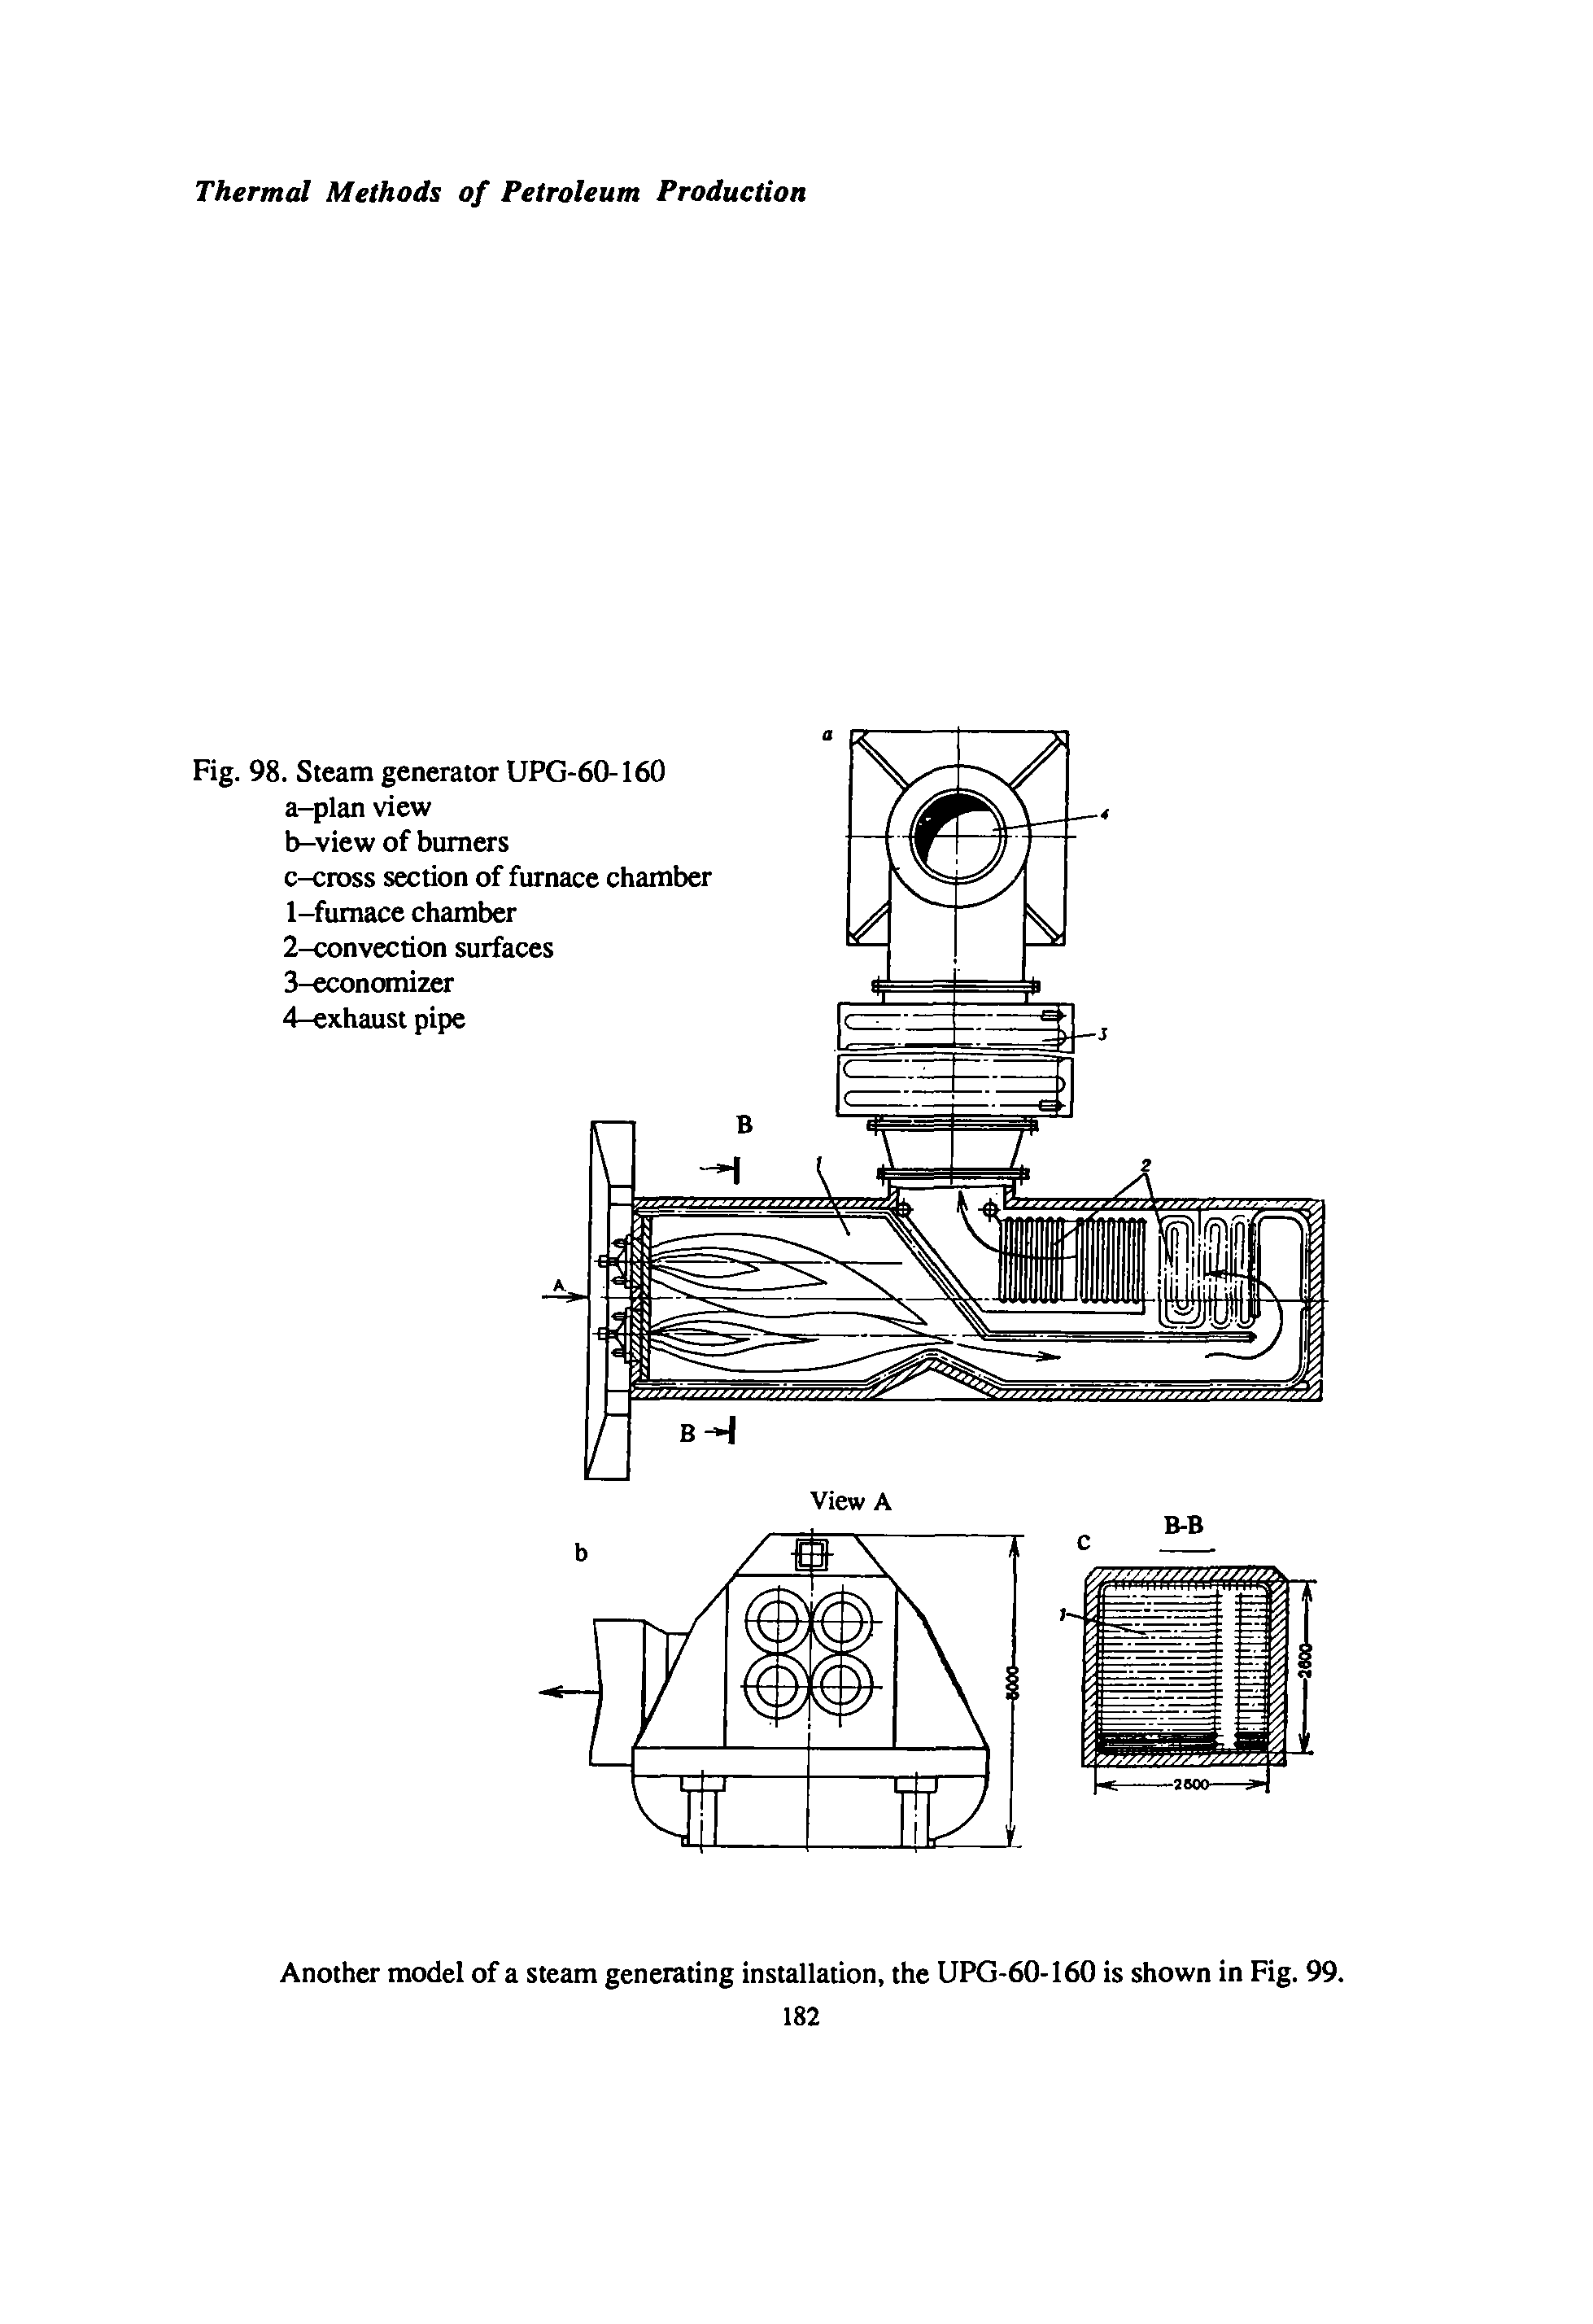 Fig. 98. Steam generator UPG-60-160 a-plan view b-view of burners c-cross section of furnace chamber...